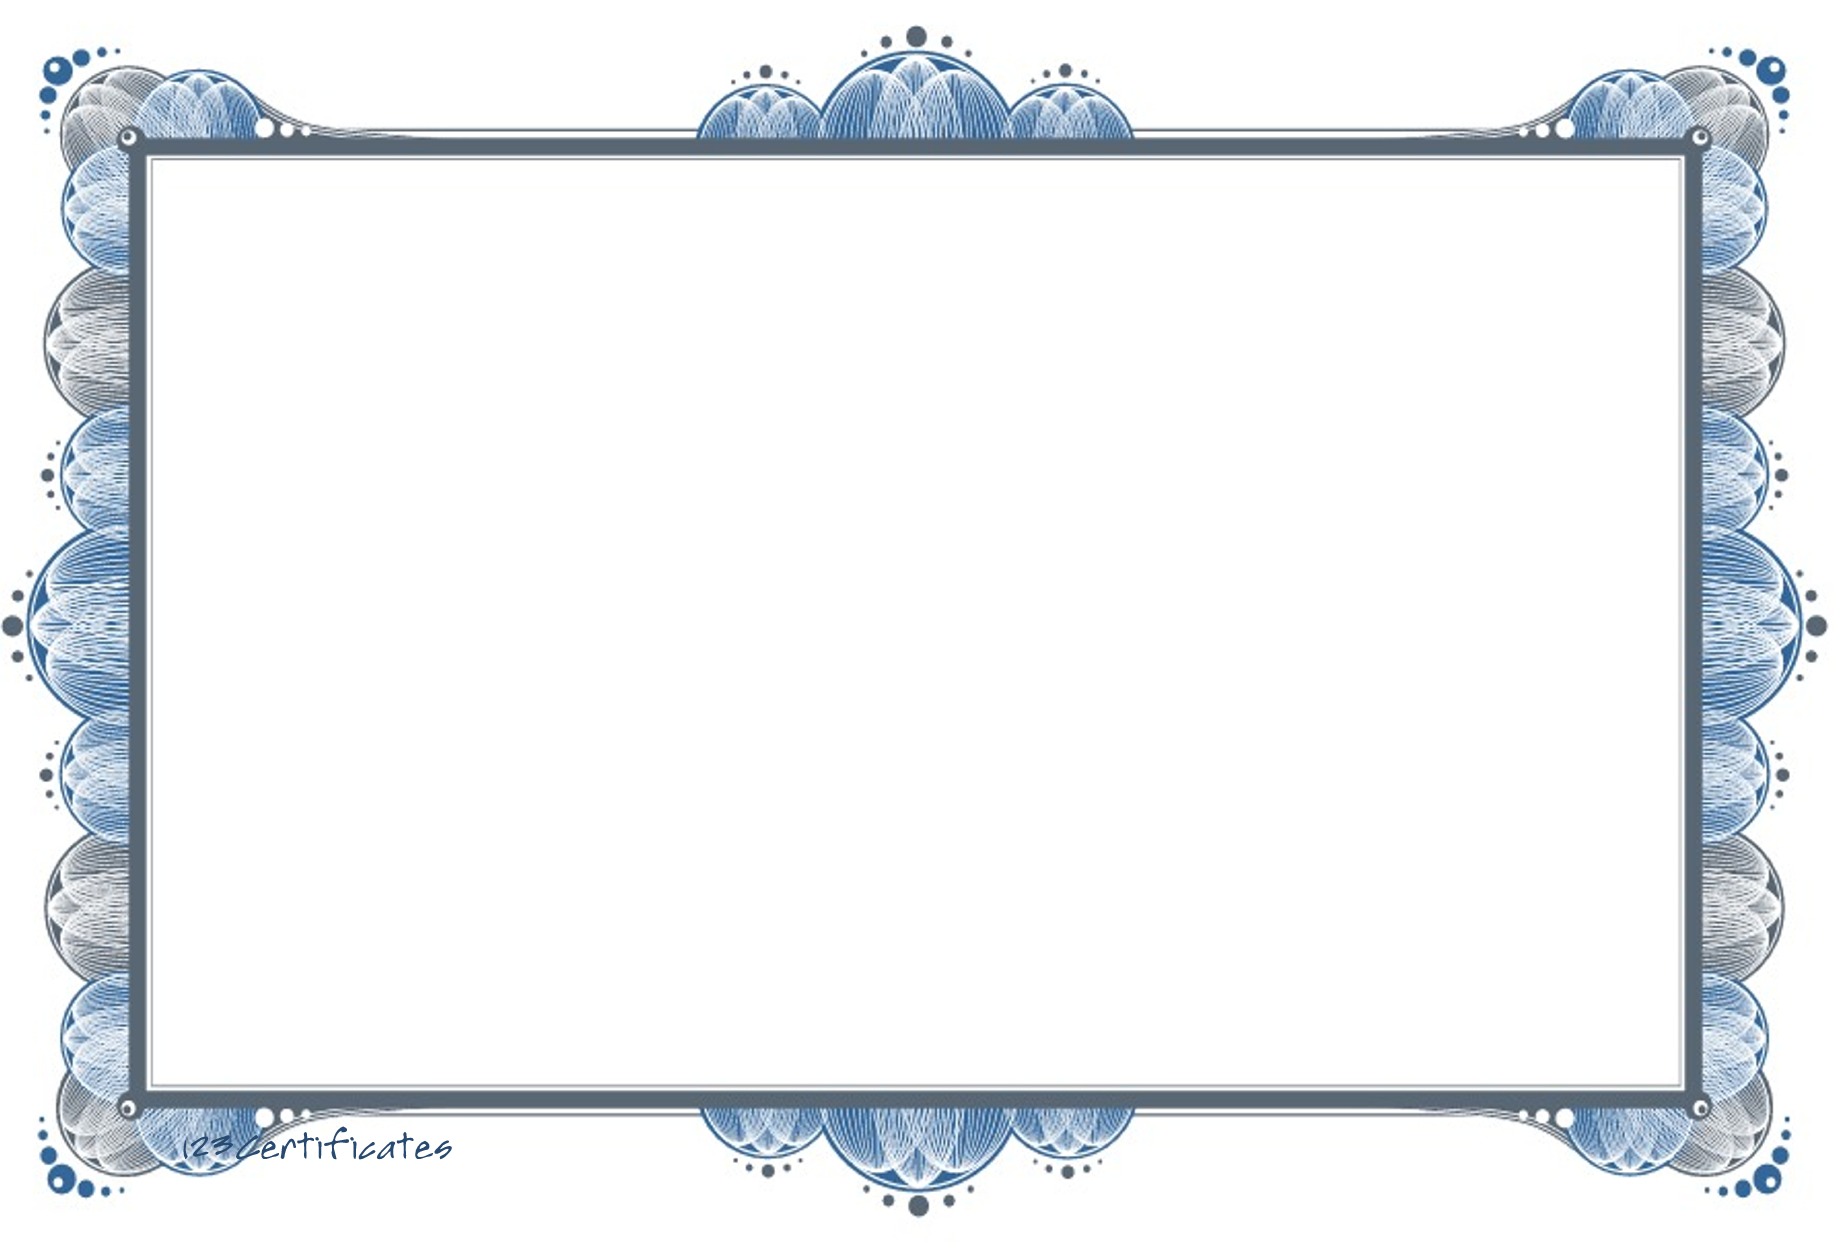 Free Certificate Borders, Download Free Certificate Borders png Regarding Award Certificate Border Template